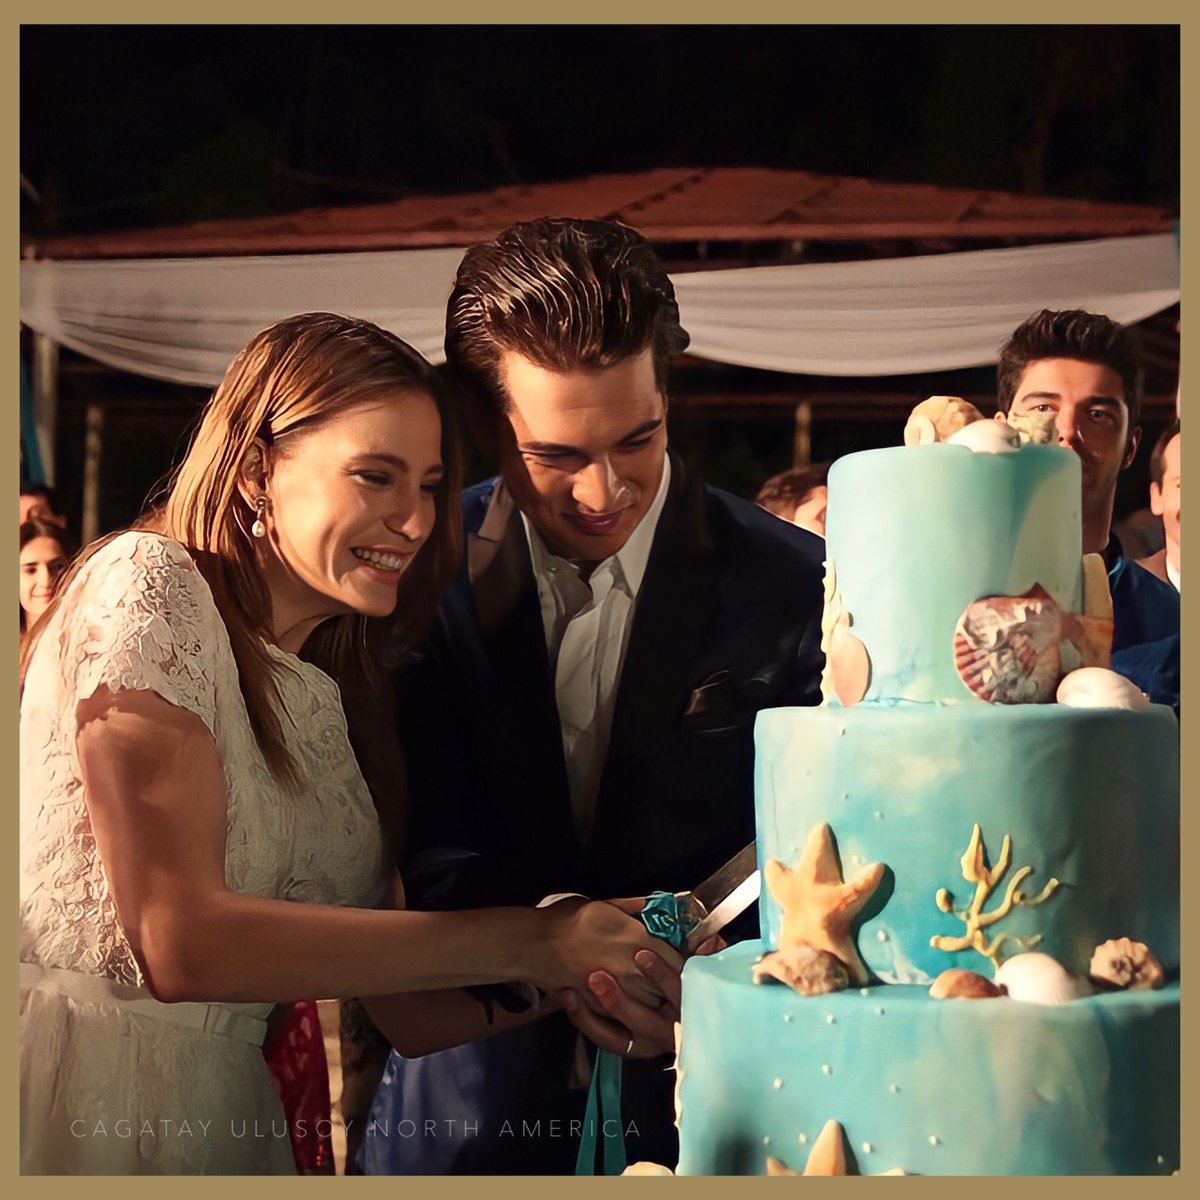 #ÇağatayUlusoy cutting cake for a wedding that actually lasted😄 #Yamira made for a beautiful couple in #Medcezir • Nowadays, his real life marriage rumors give away the quality of the newspaper carrying the news. 

#SerenaySarıkaya #YamanKoper #MiraBeylice